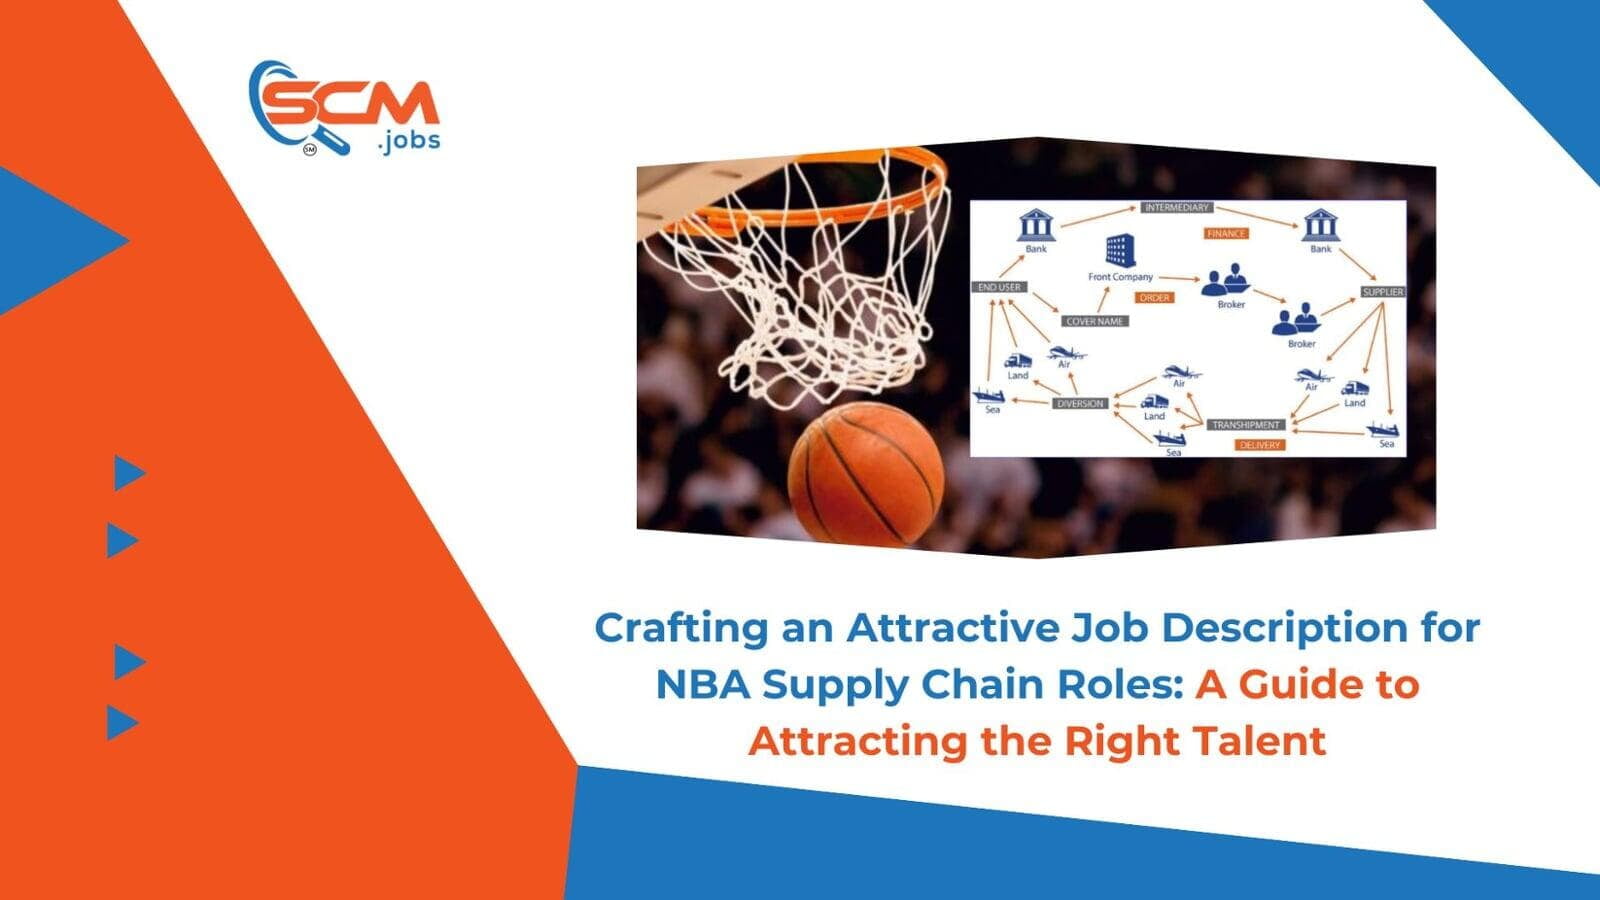 Crafting an Attractive Job Description for NBA Supply Chain Roles: A Guide to Attracting the Right Talent